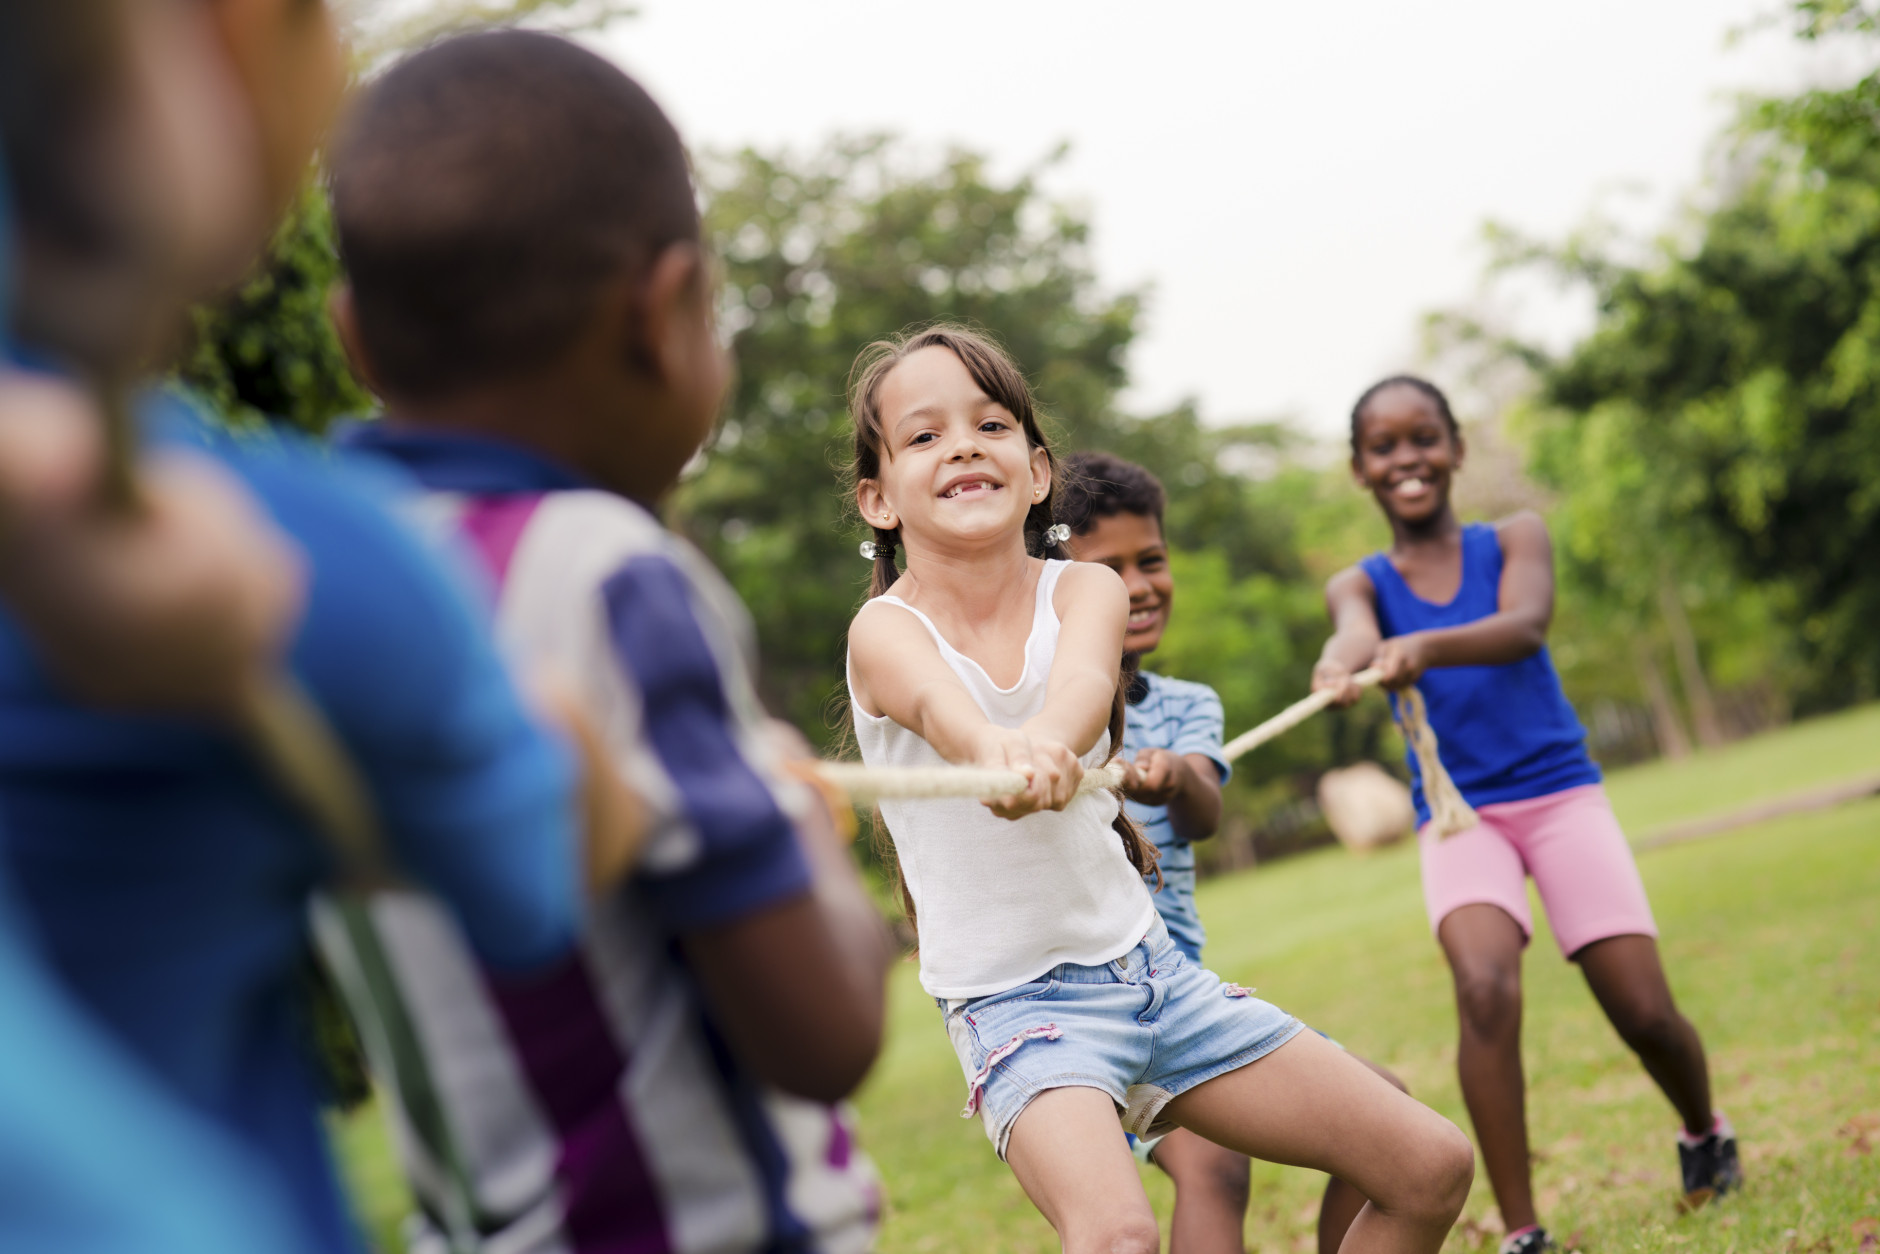 Many parents rely on summer camps to entertain the kids and fill gaps in child care. (Thinkstock)